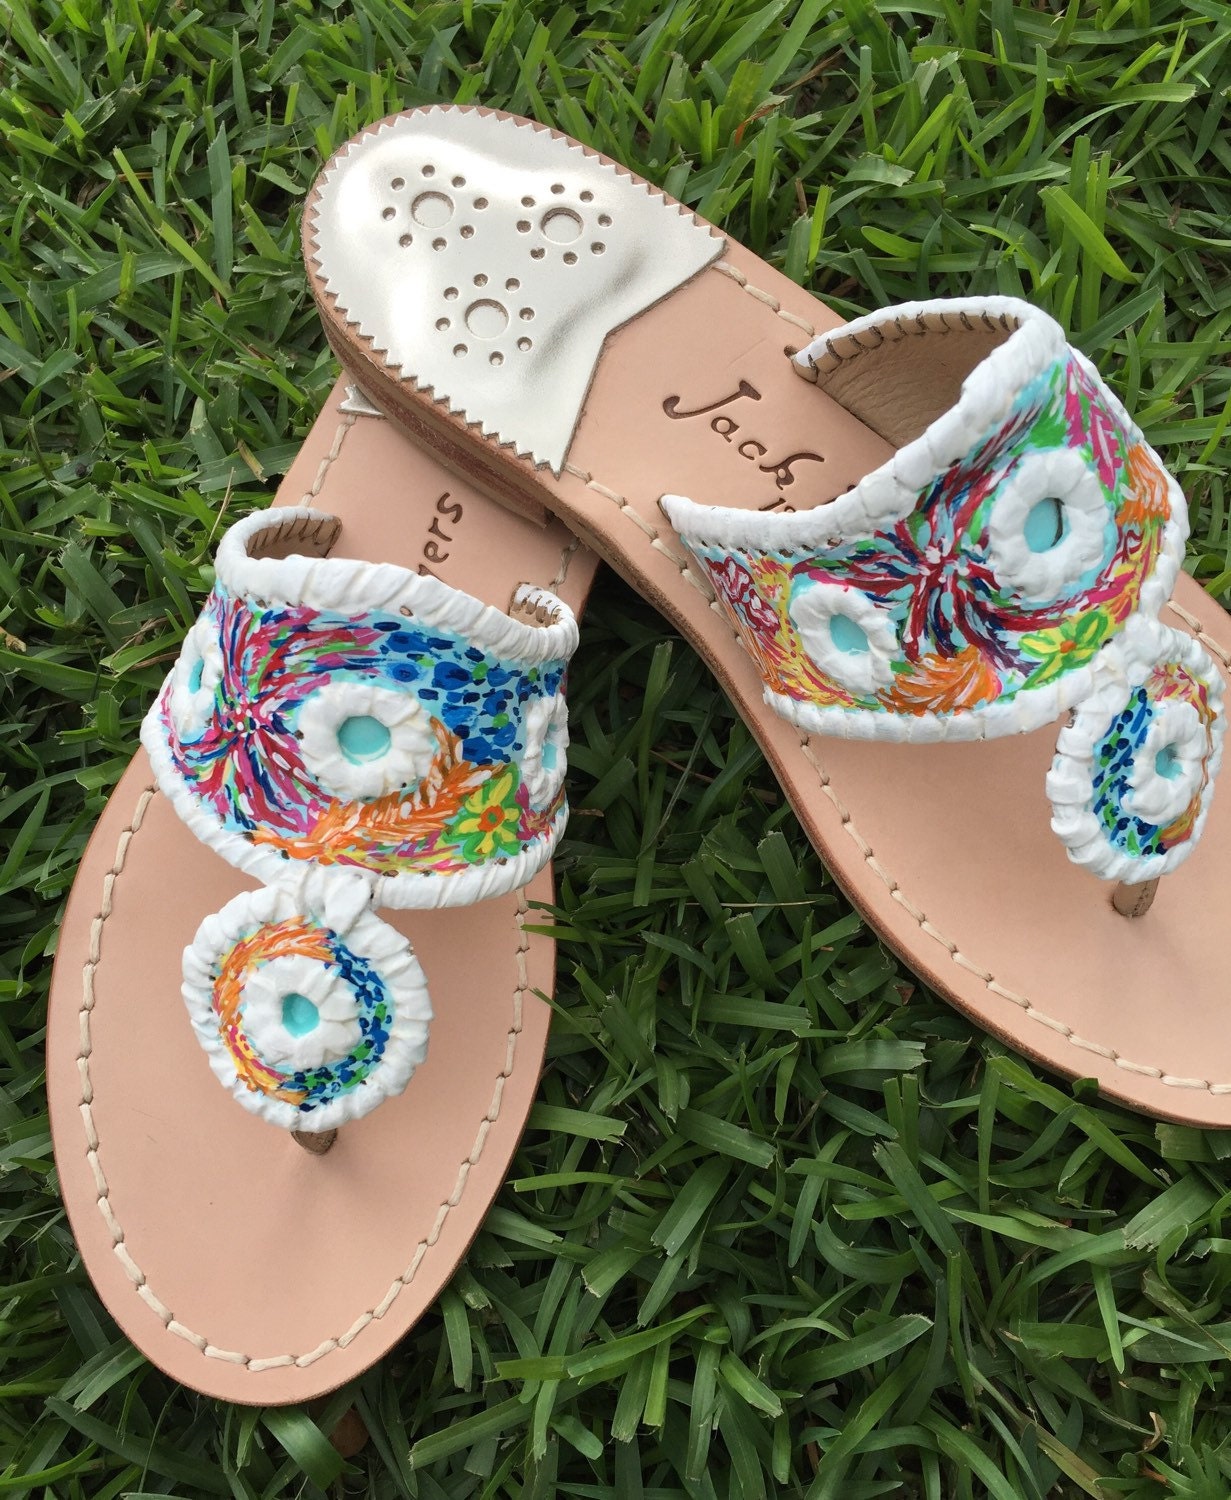 Authentic Jack Rogers hand painted in Lilly Pulitzer inspired